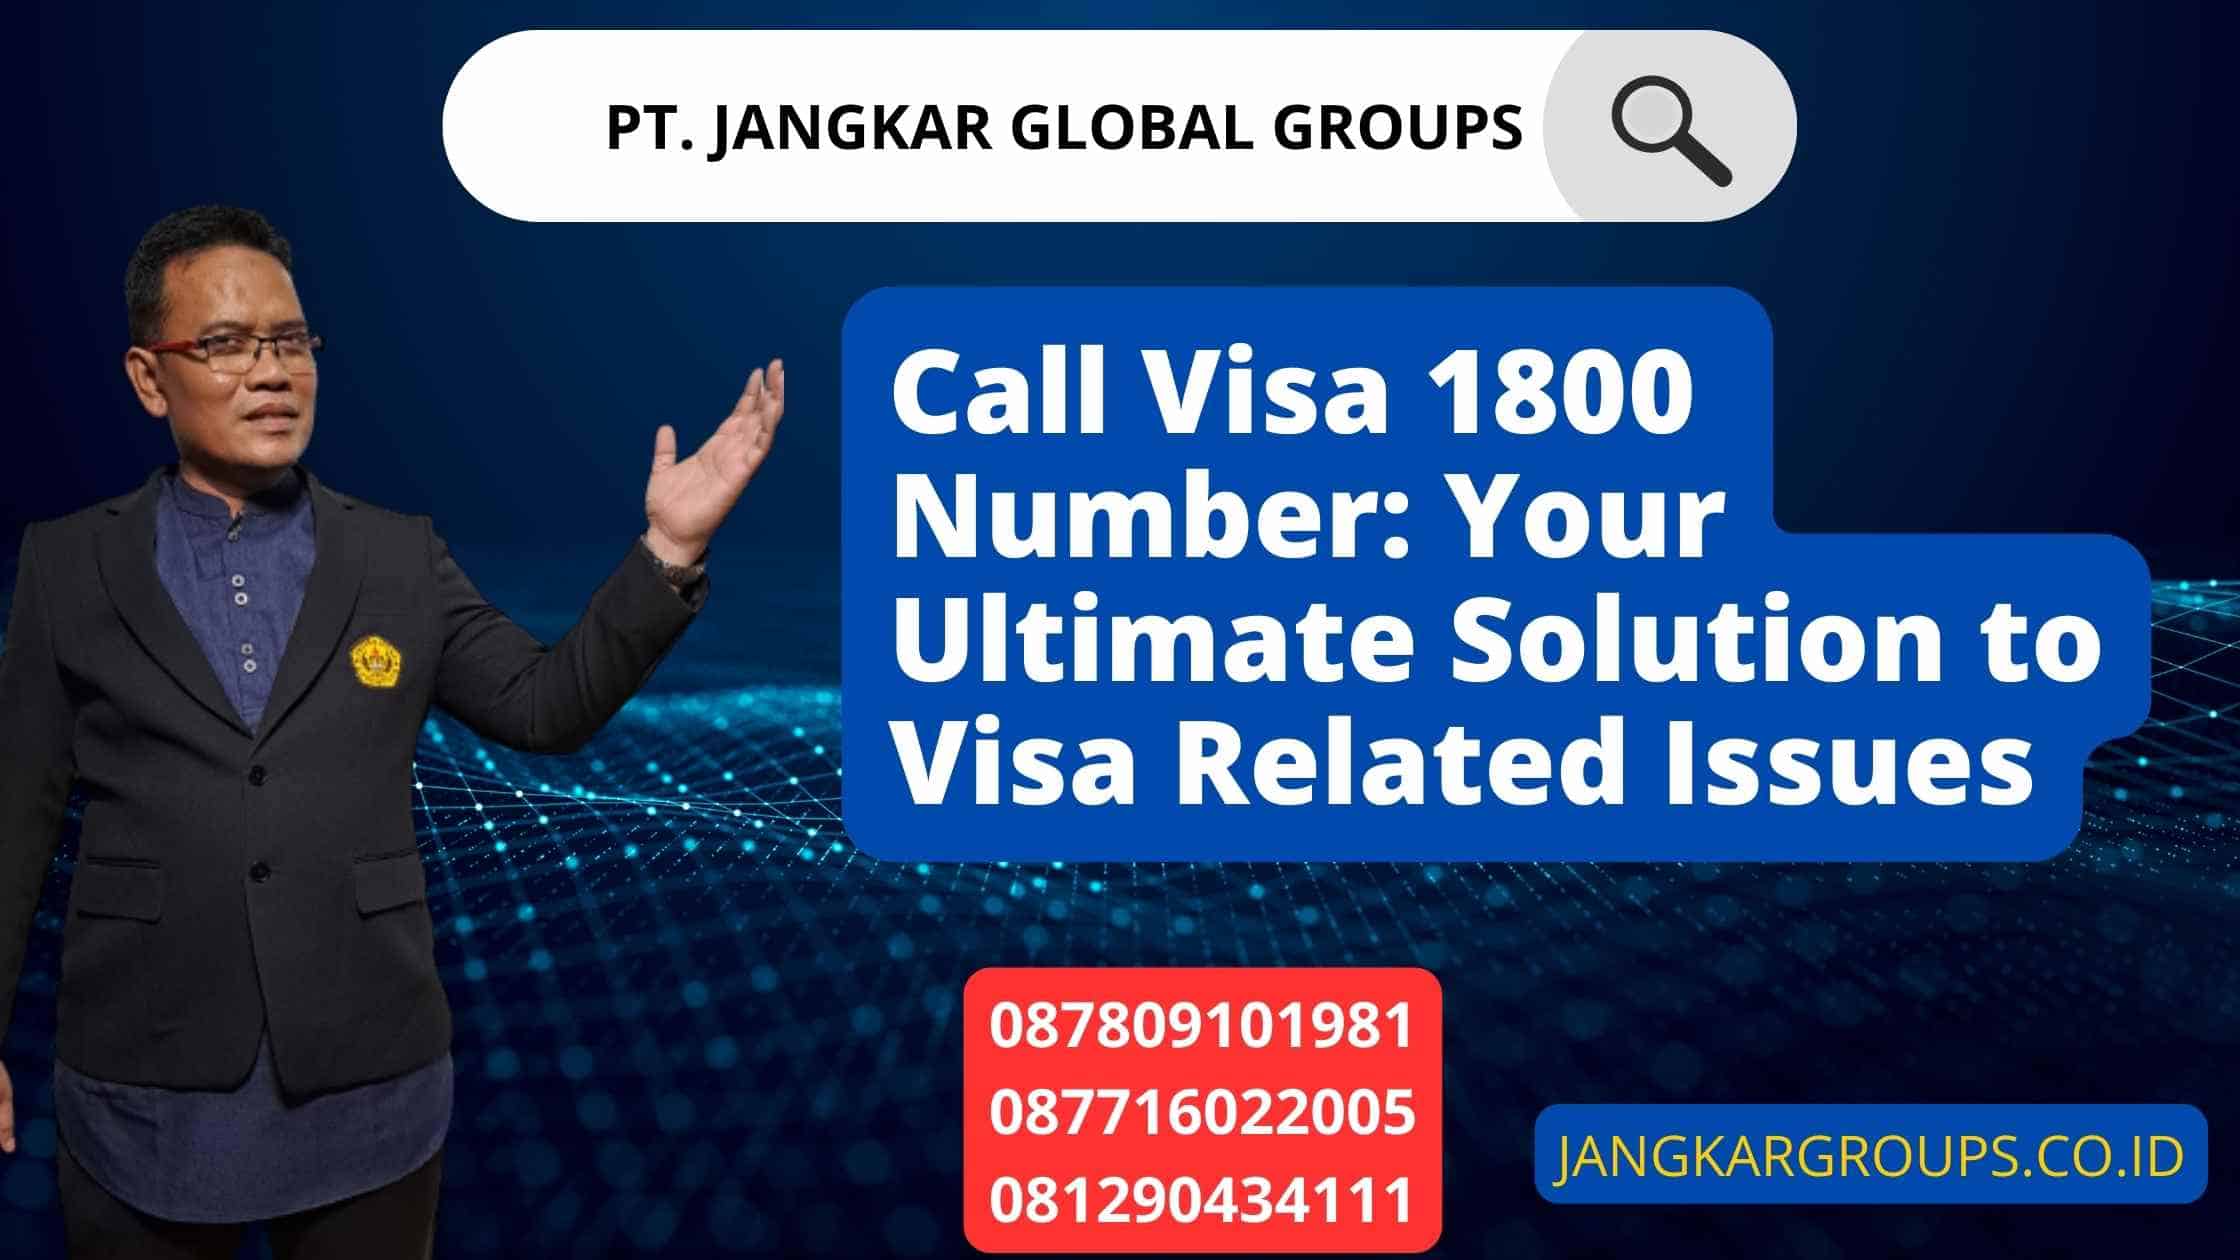 Call Visa 1800 Number: Your Ultimate Solution to Visa Related Issues